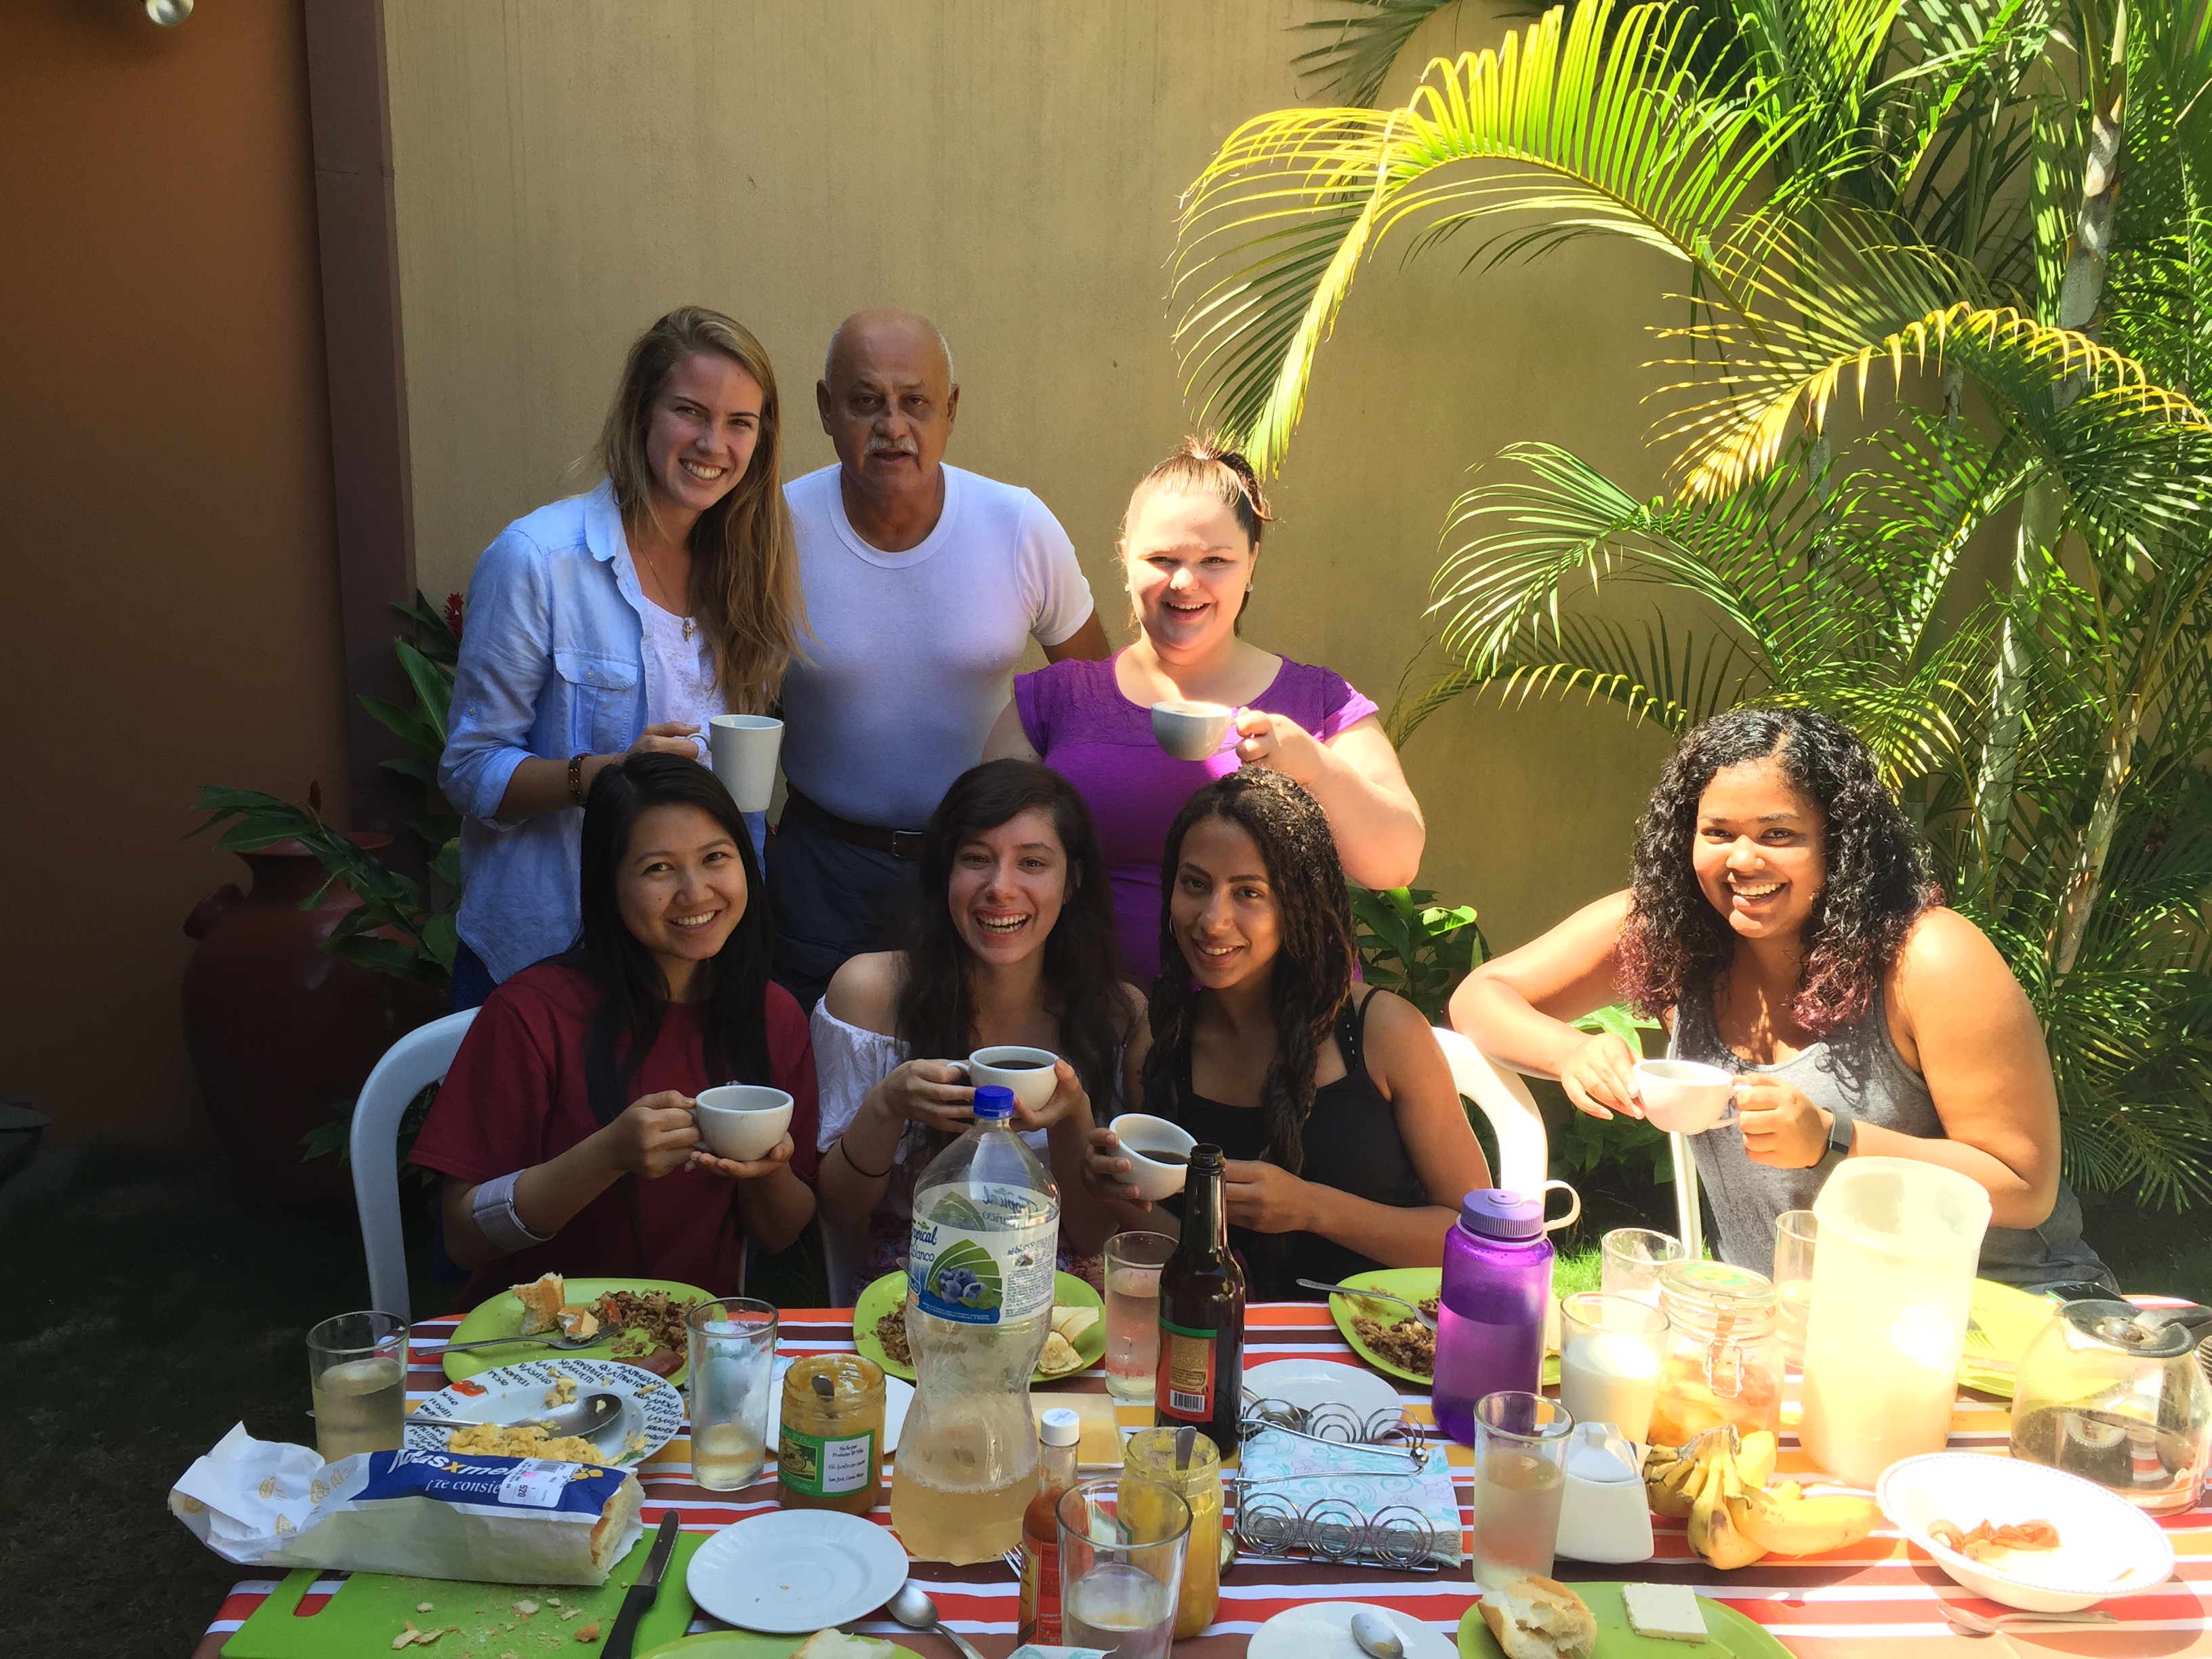 My Spanish professor's family invited the entire class over for breakfast and class lessons in his backyard!